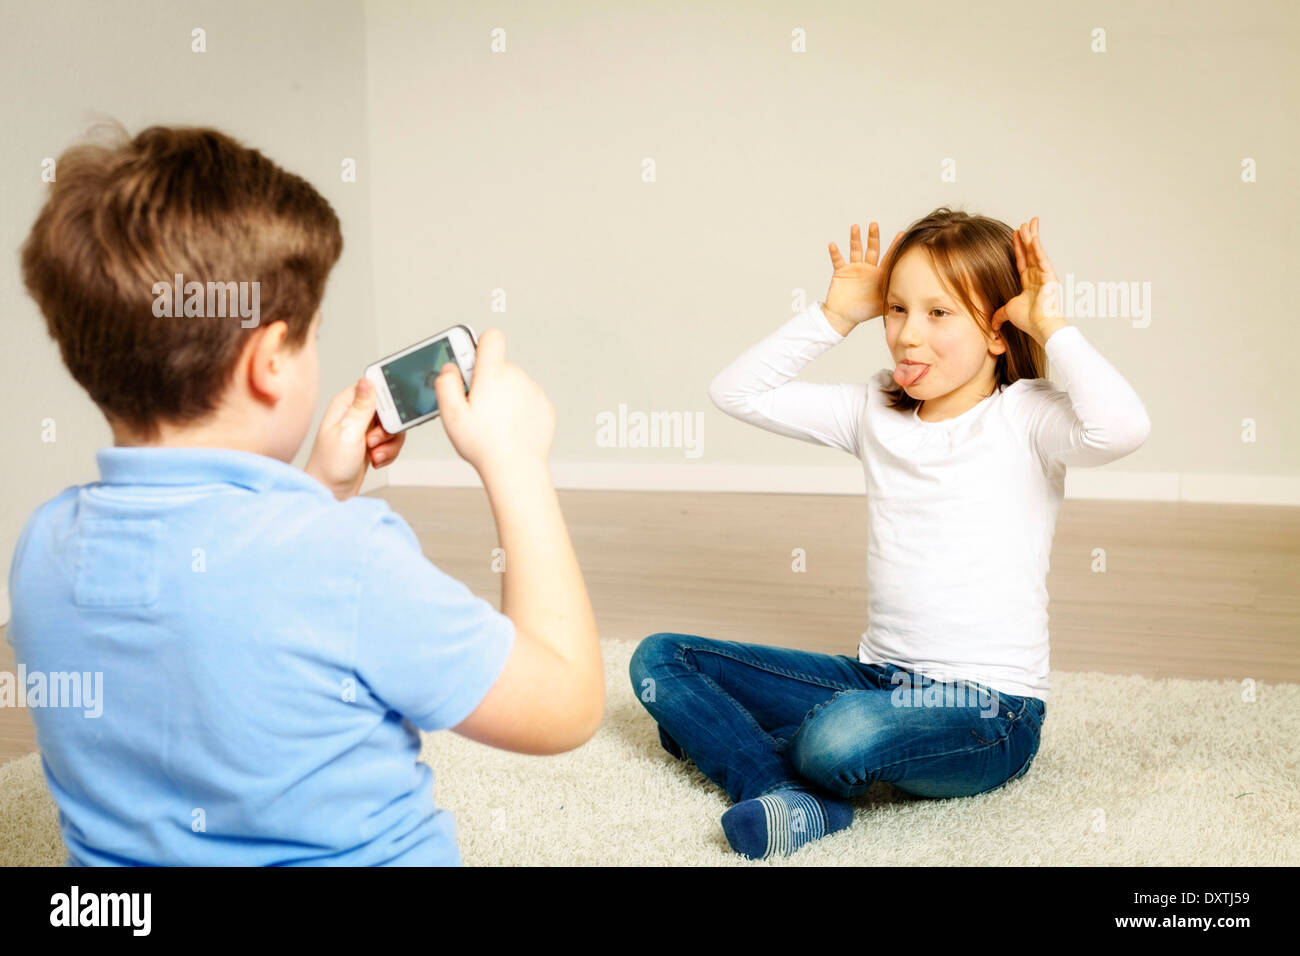 Girl making a face, boy taking picture, Munich, Bavaria, Germany Stock Photo